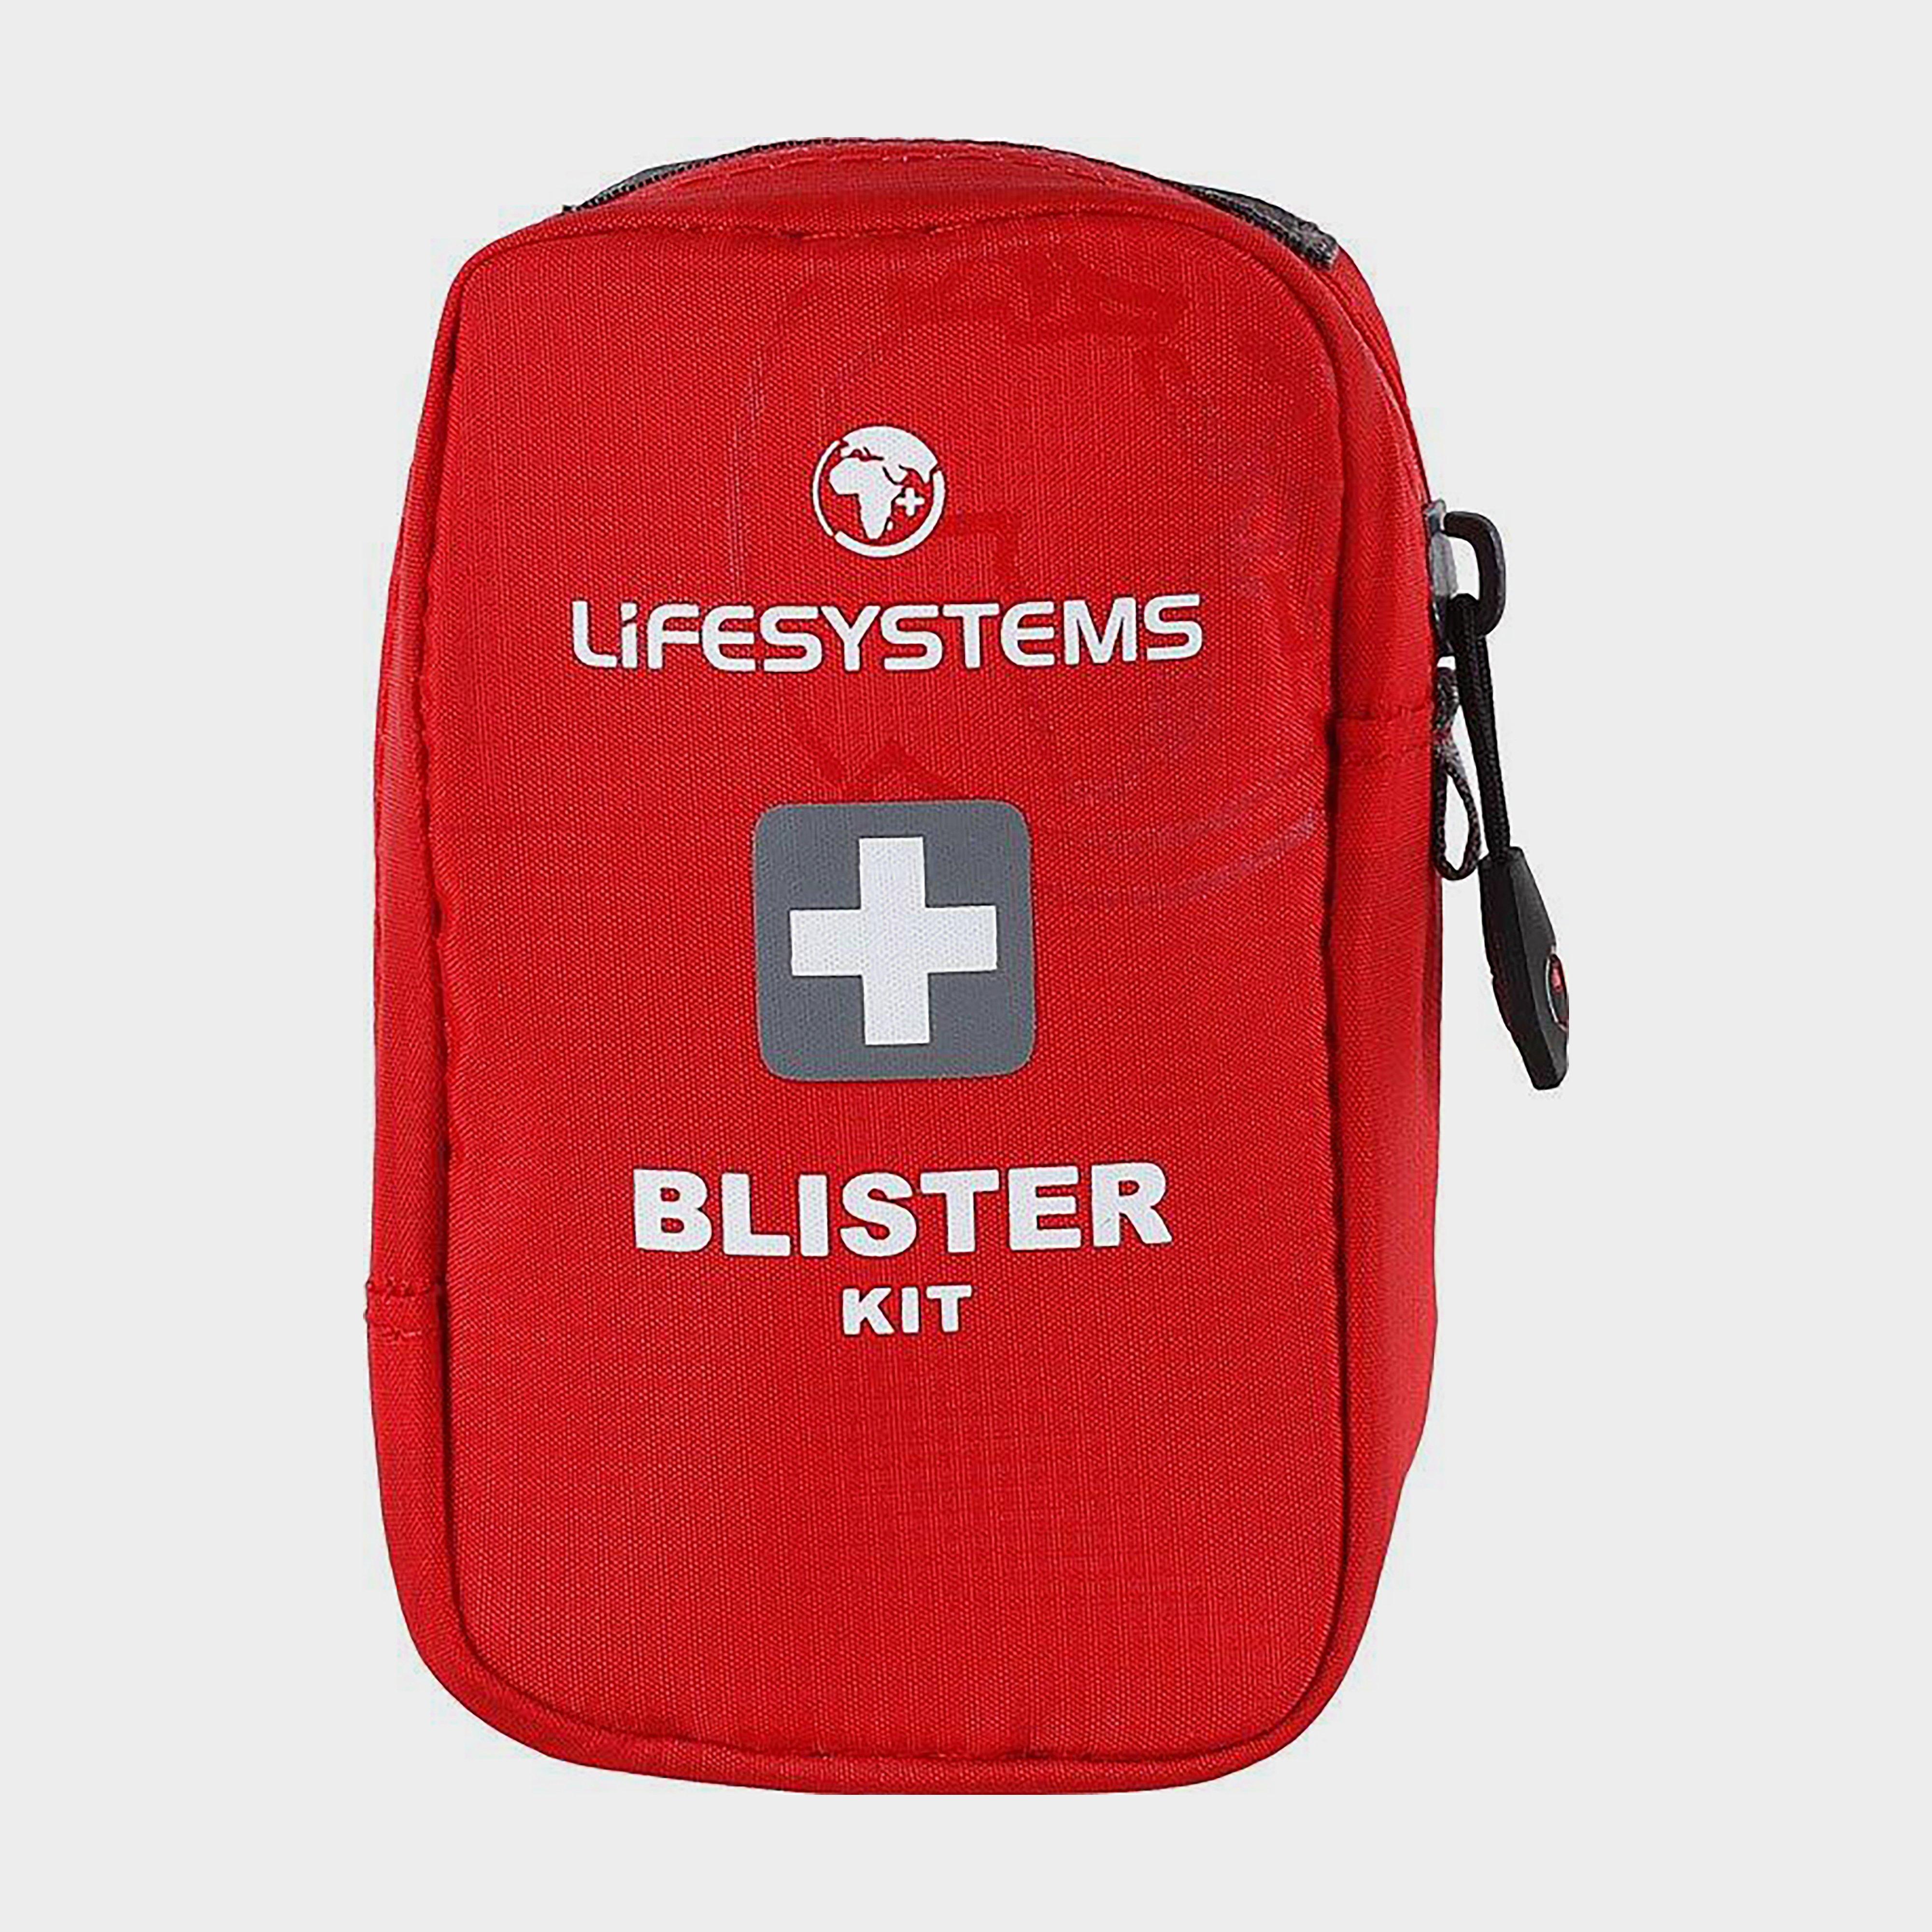 Lifesystems Blister First Aid Kit - Red/fak  Red/fak